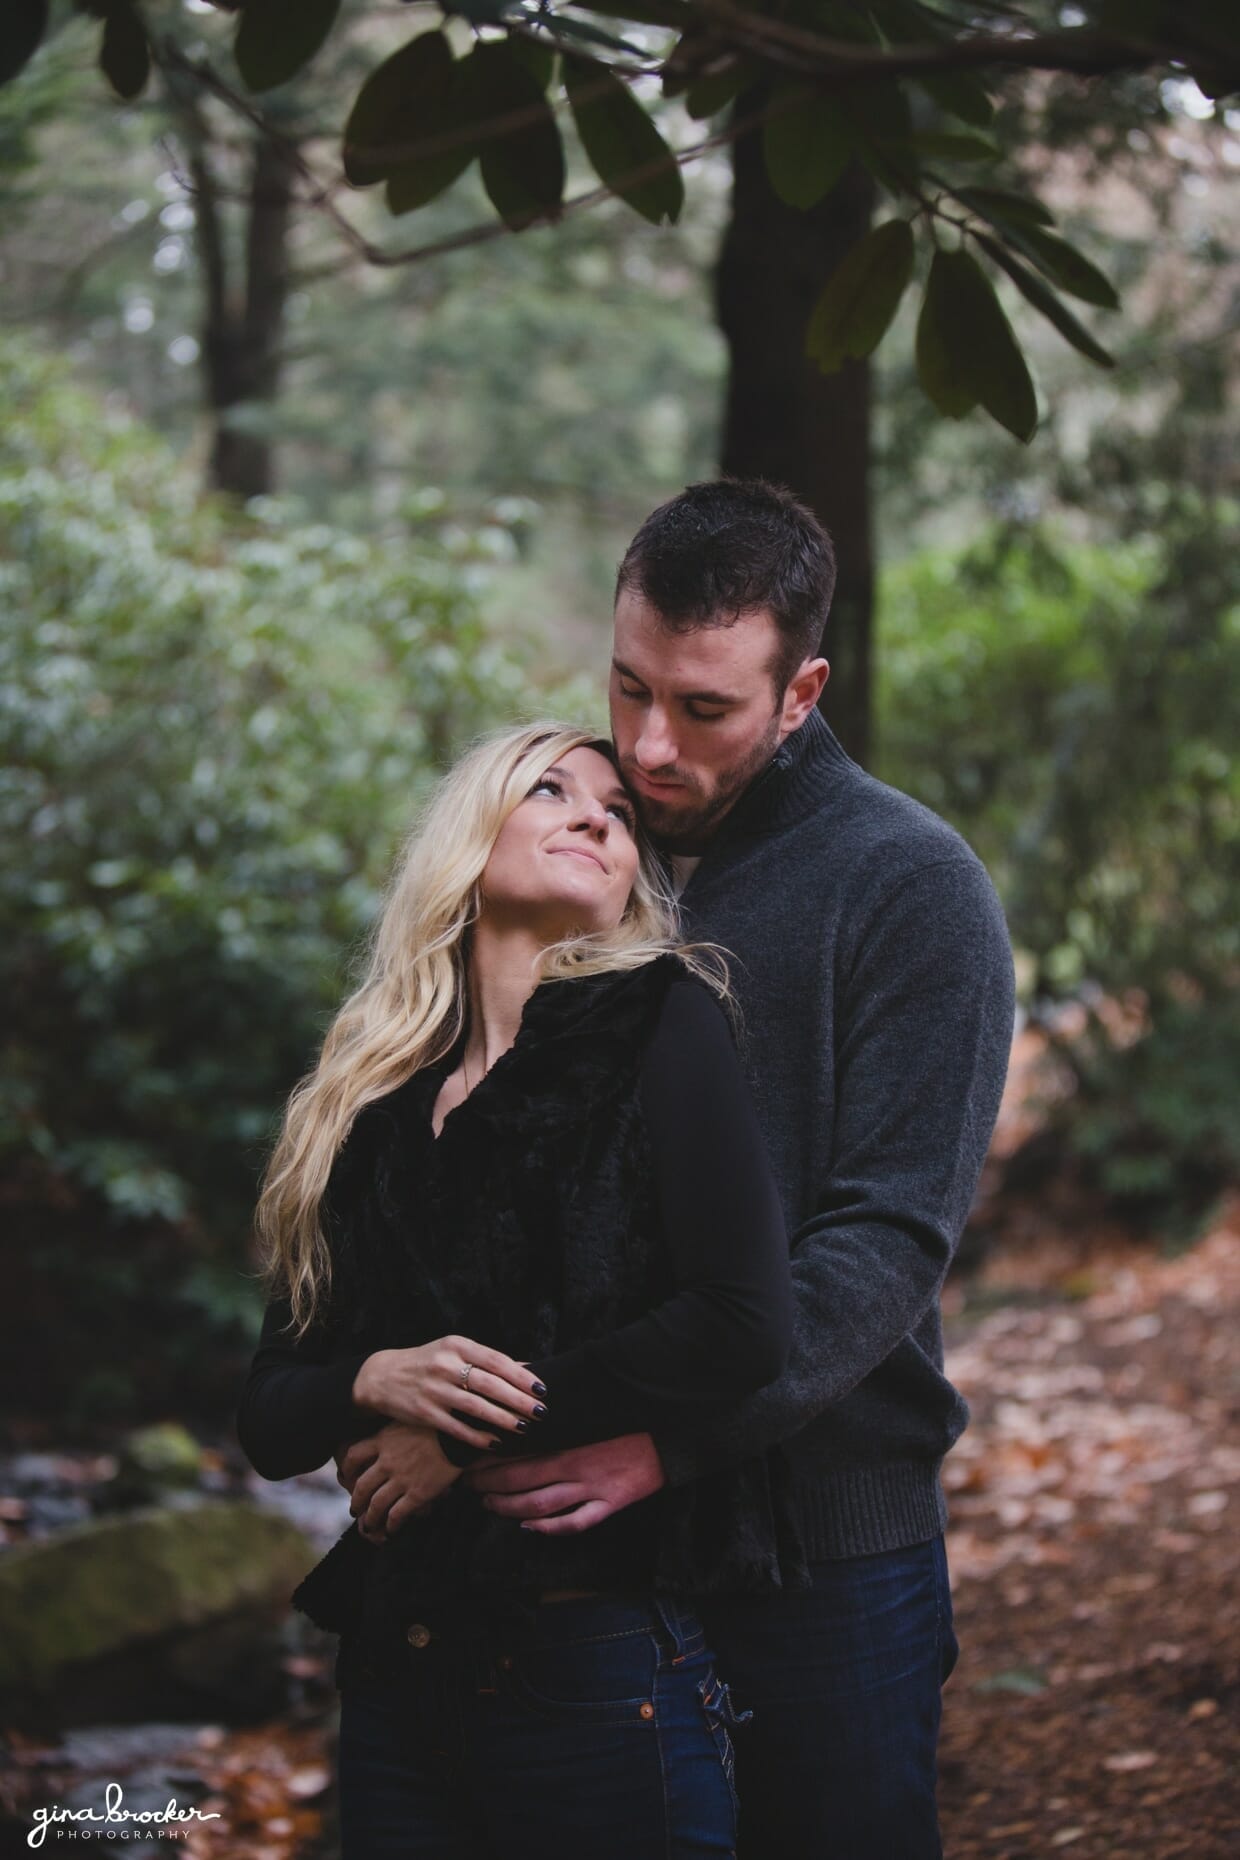 A romantic and sweet photograph of a couple cuddling in the woods during their fall couple session at the Arnold Arboretum in Boston, Massachusetts